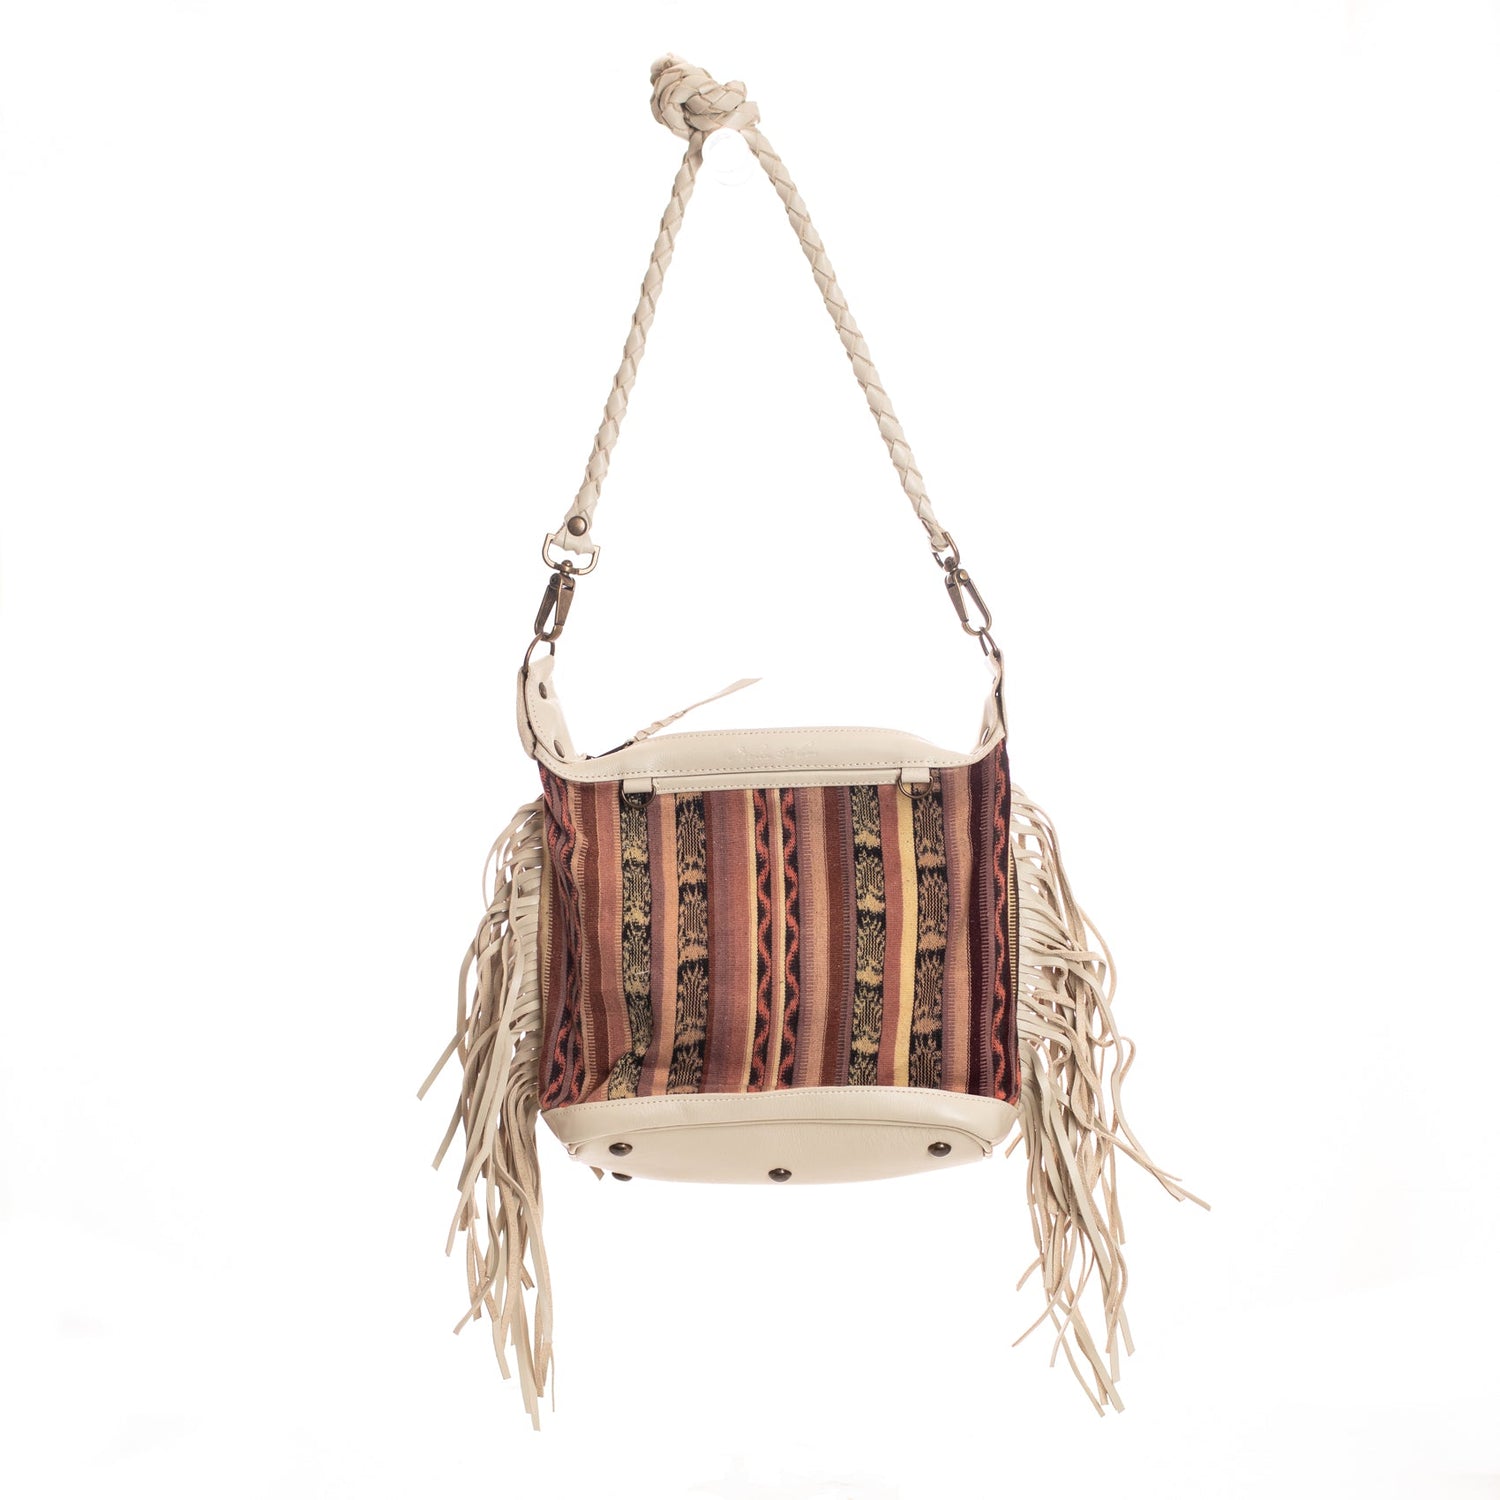 Roots Genuine Leather Fringe Purse Crossbody Brown Braided Strap